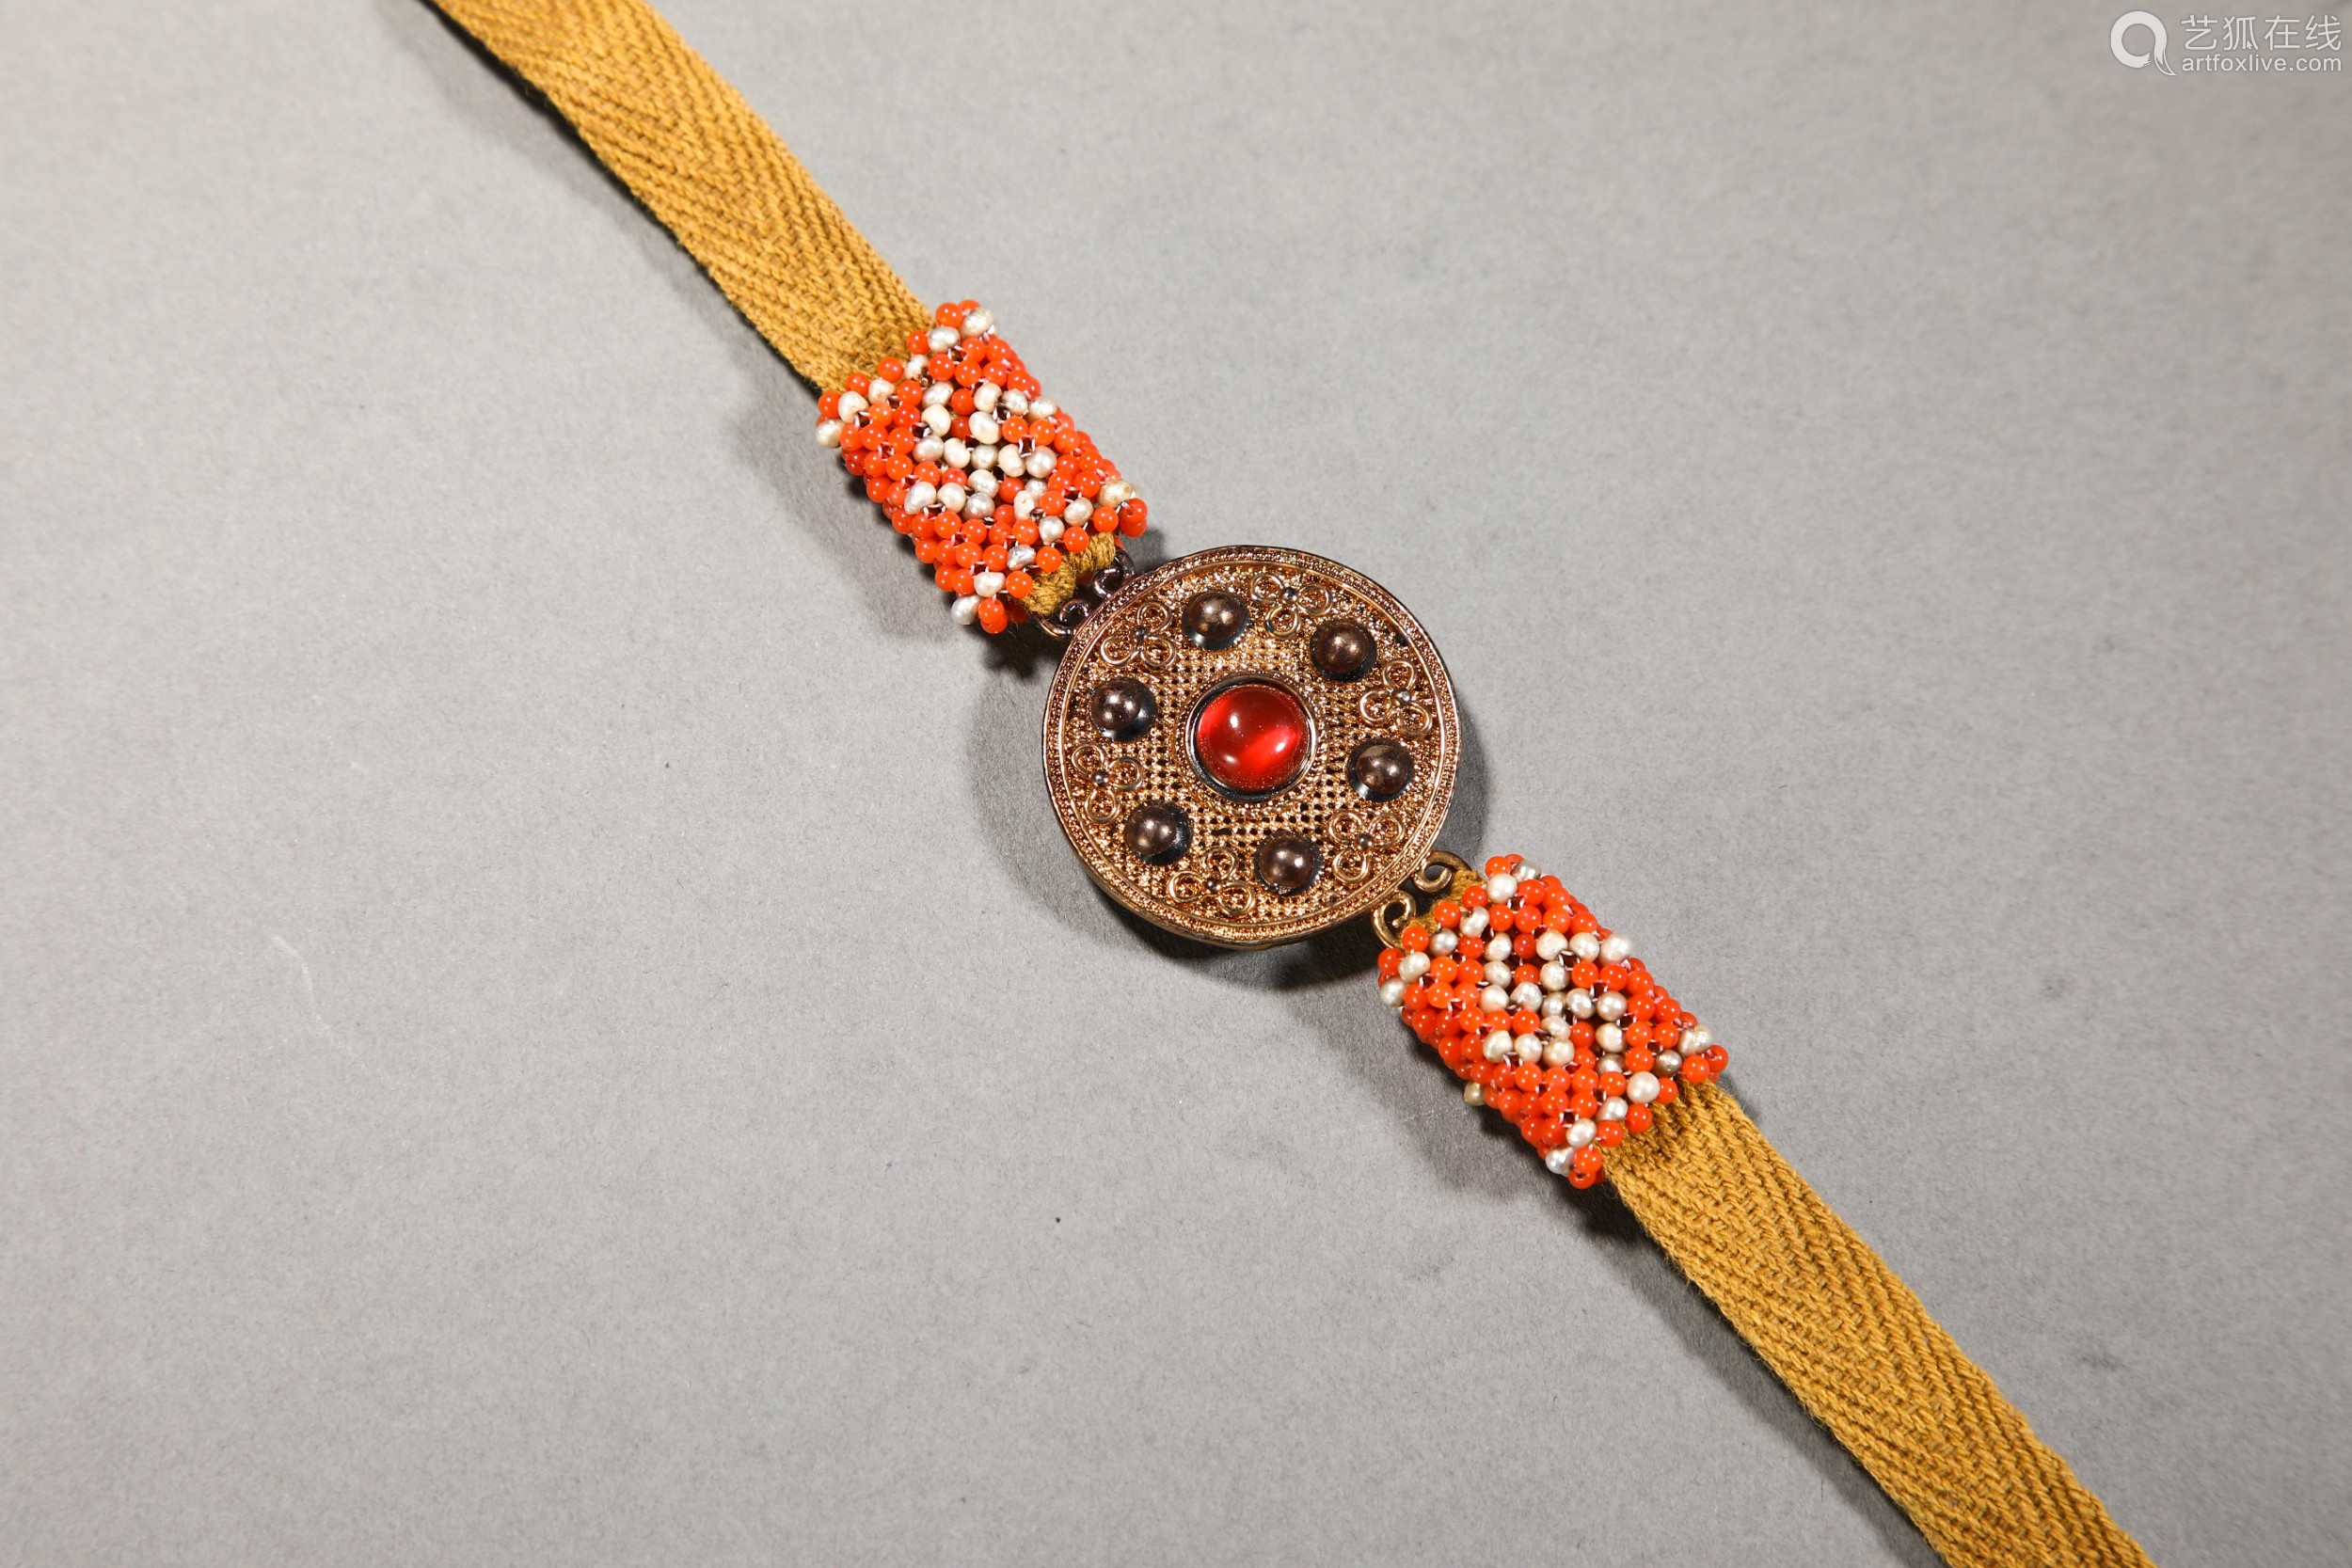 A set of court beads in the Qing Dynasty